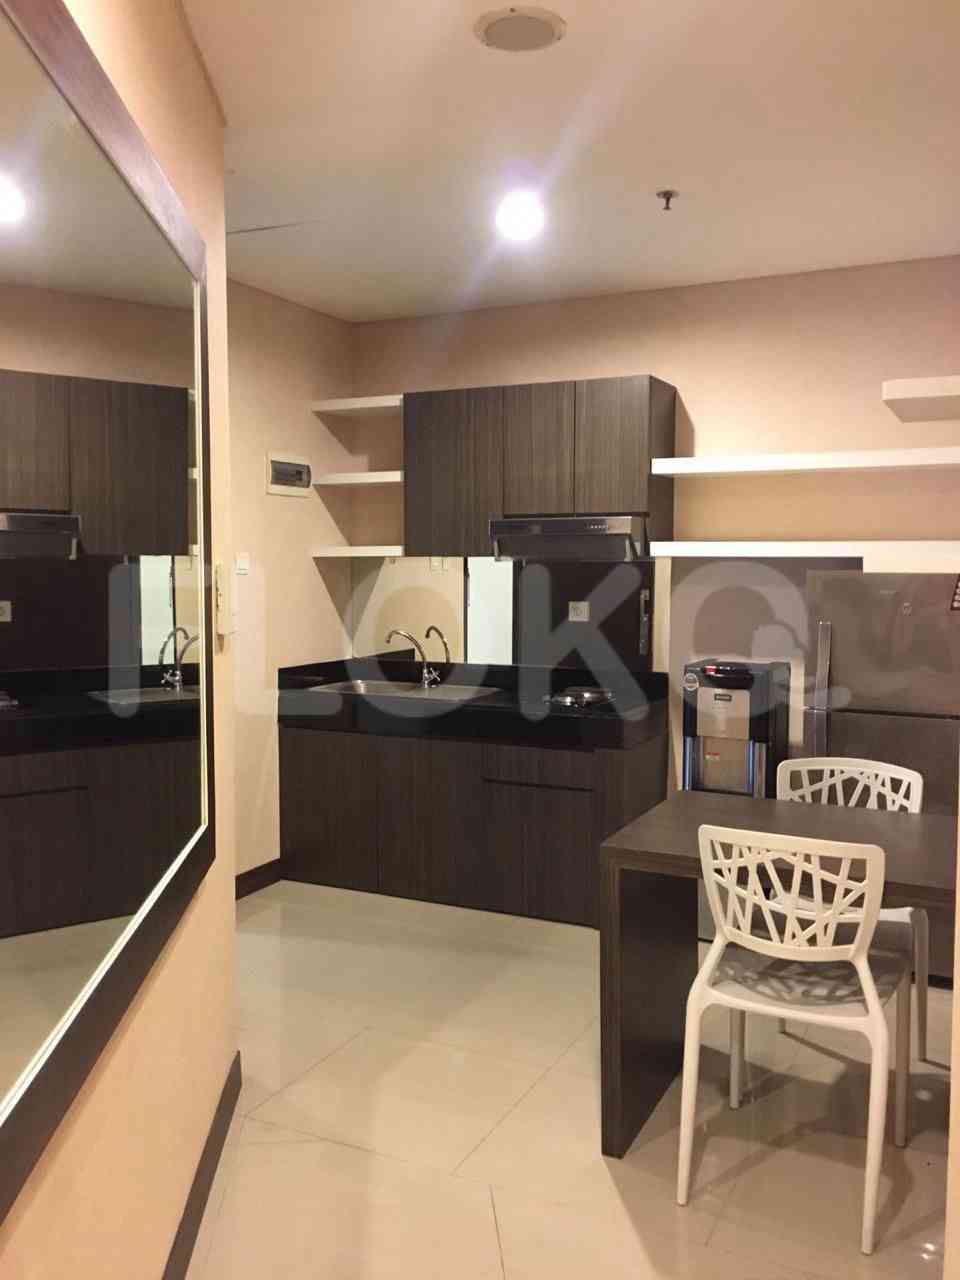 2 Bedroom on 19th Floor for Rent in GP Plaza Apartment - ftaef4 3